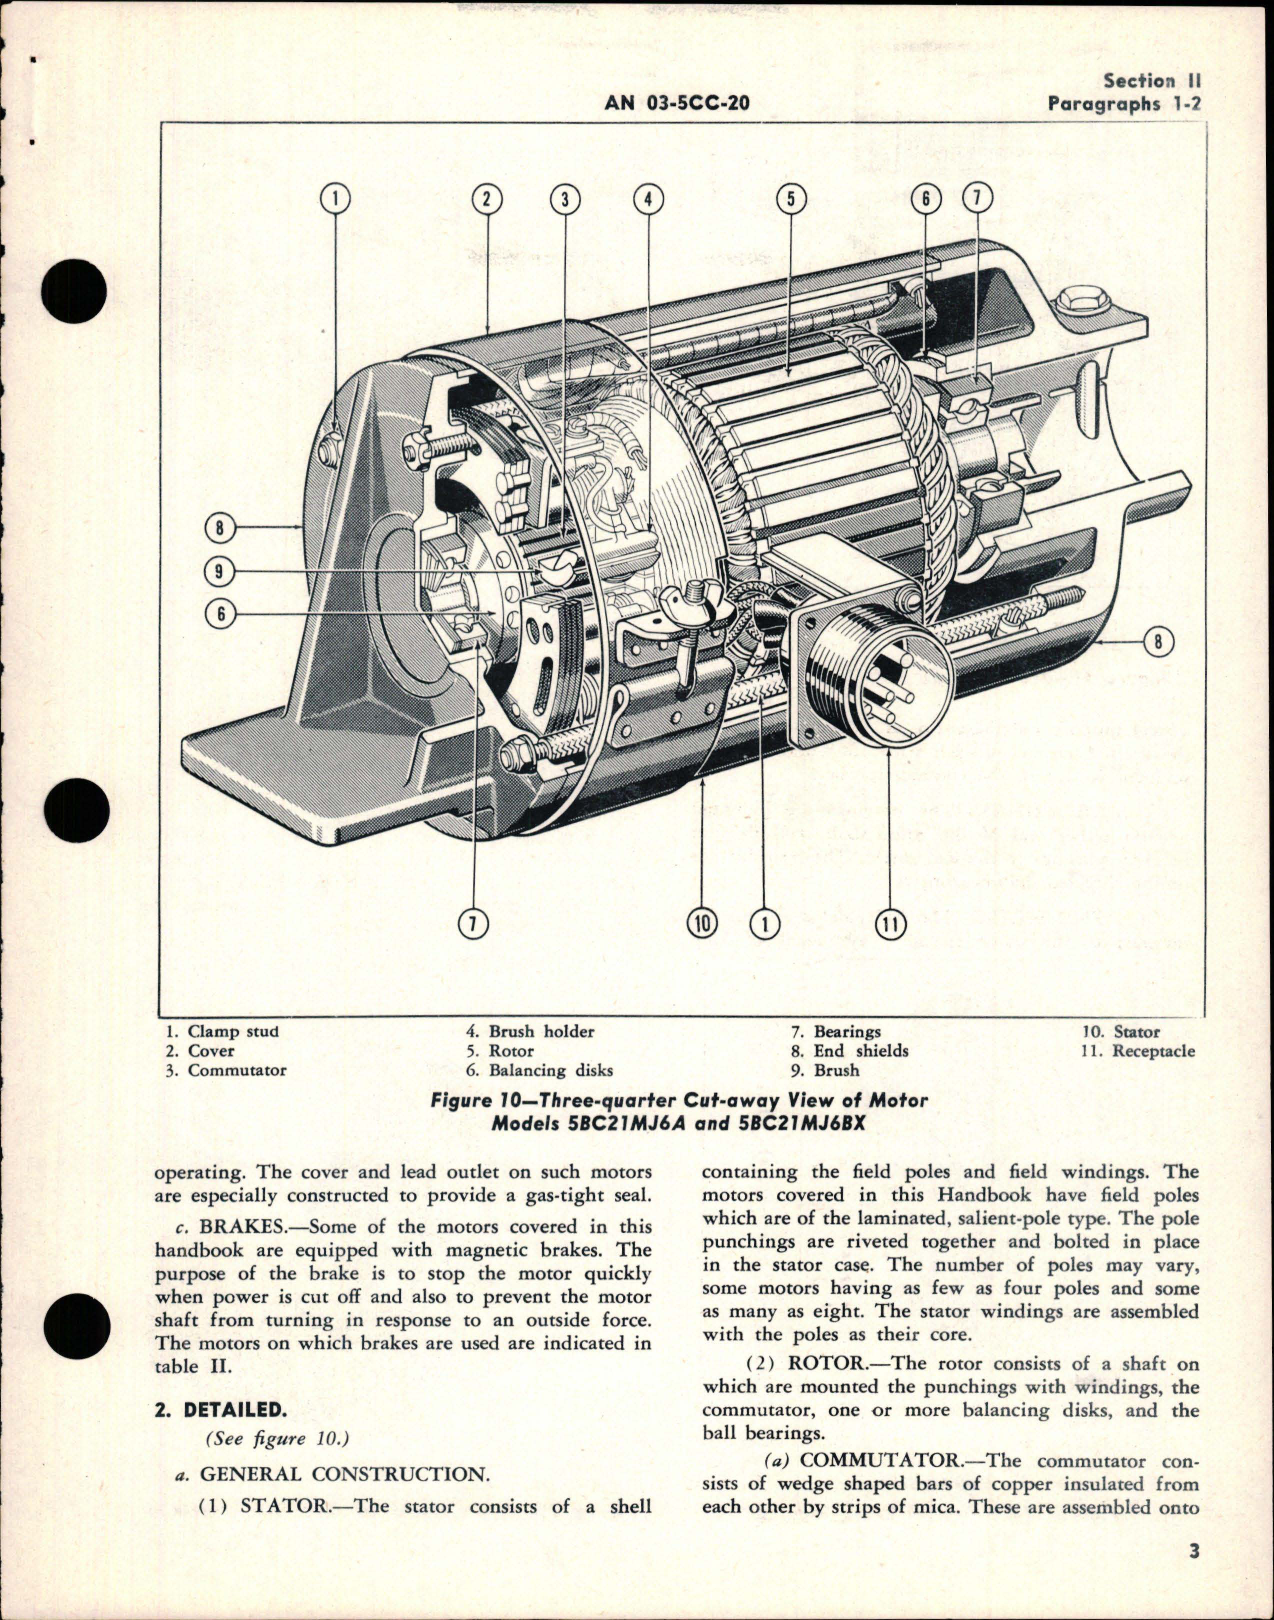 Sample page 7 from AirCorps Library document: Instructions with Parts Catalog for Aircraft Motors - Models 5BC21 and 5BC31 Series 